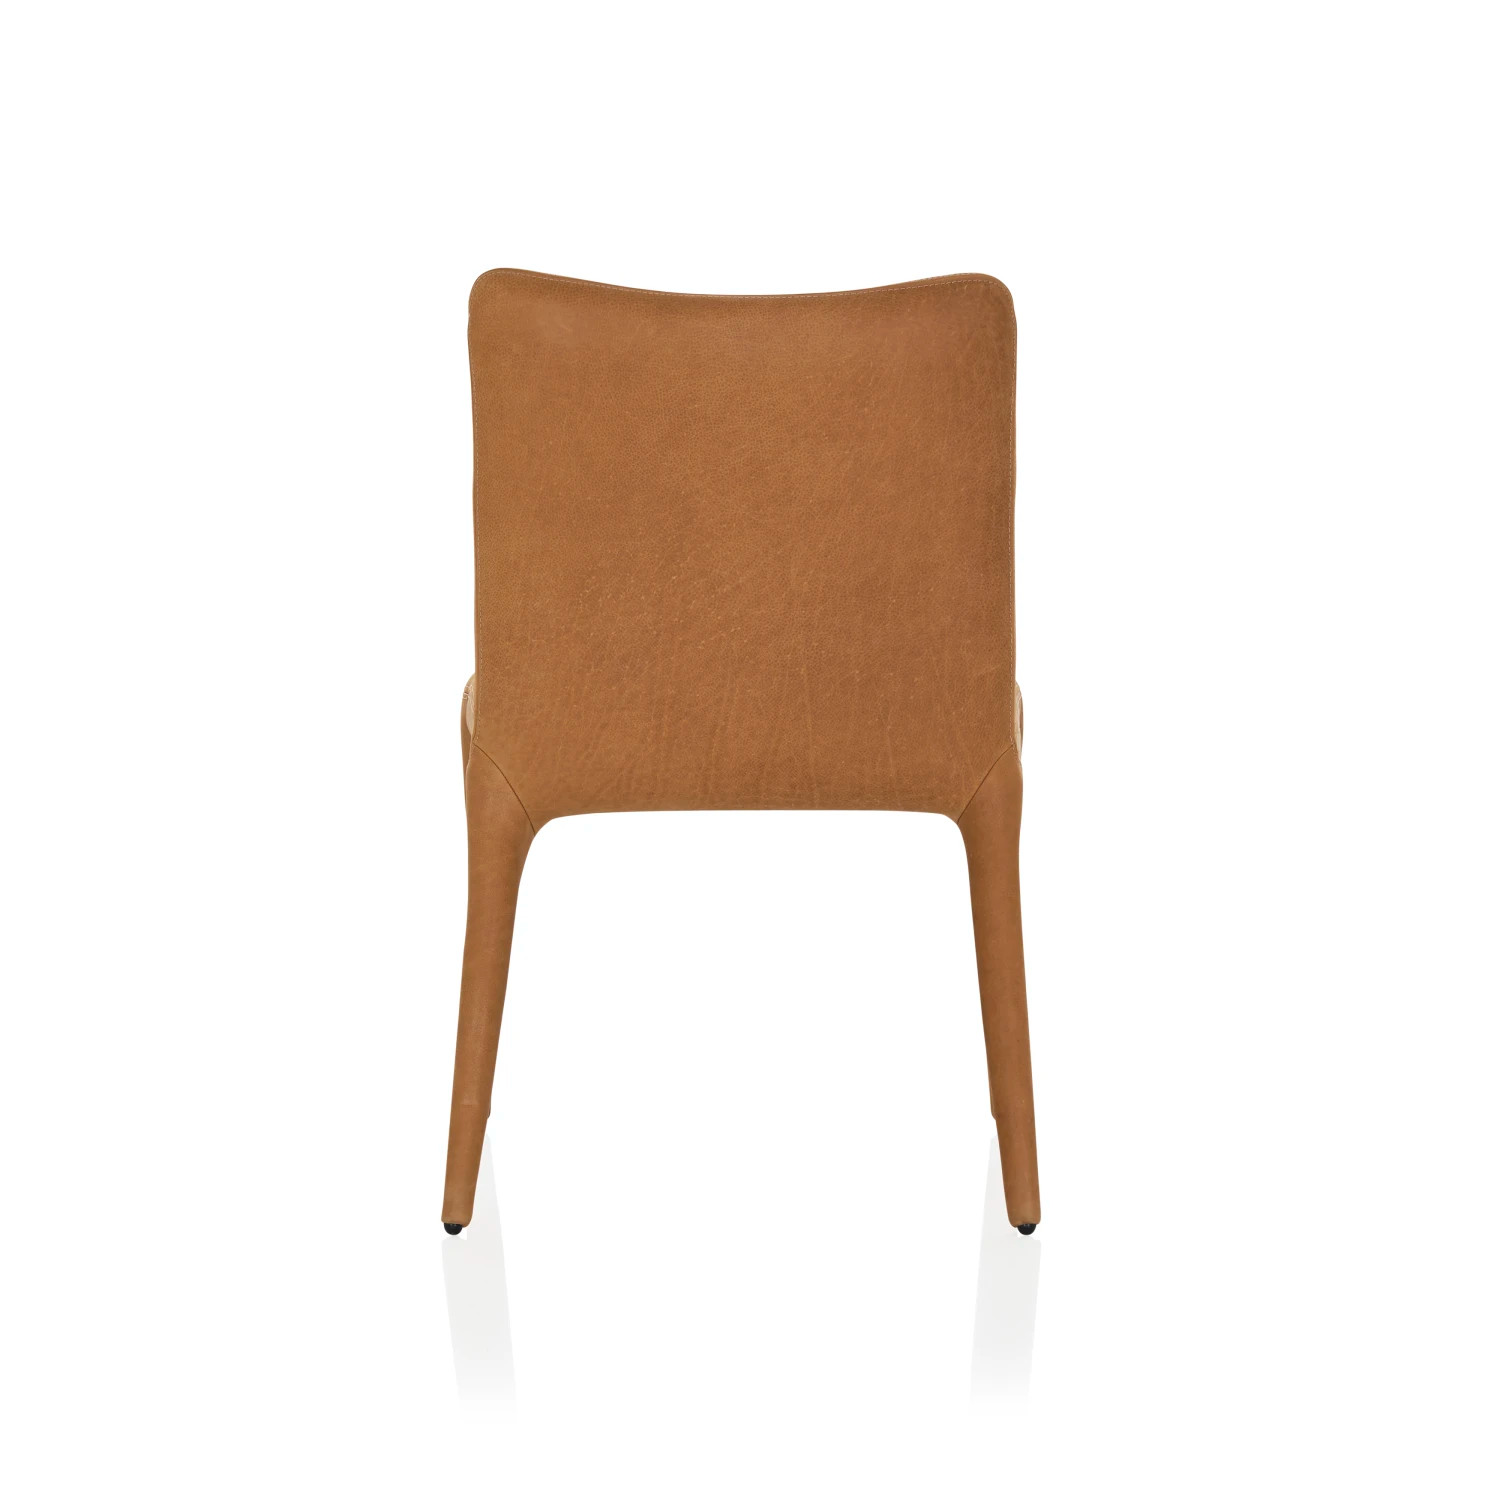 The Cara Leather Dining Chair